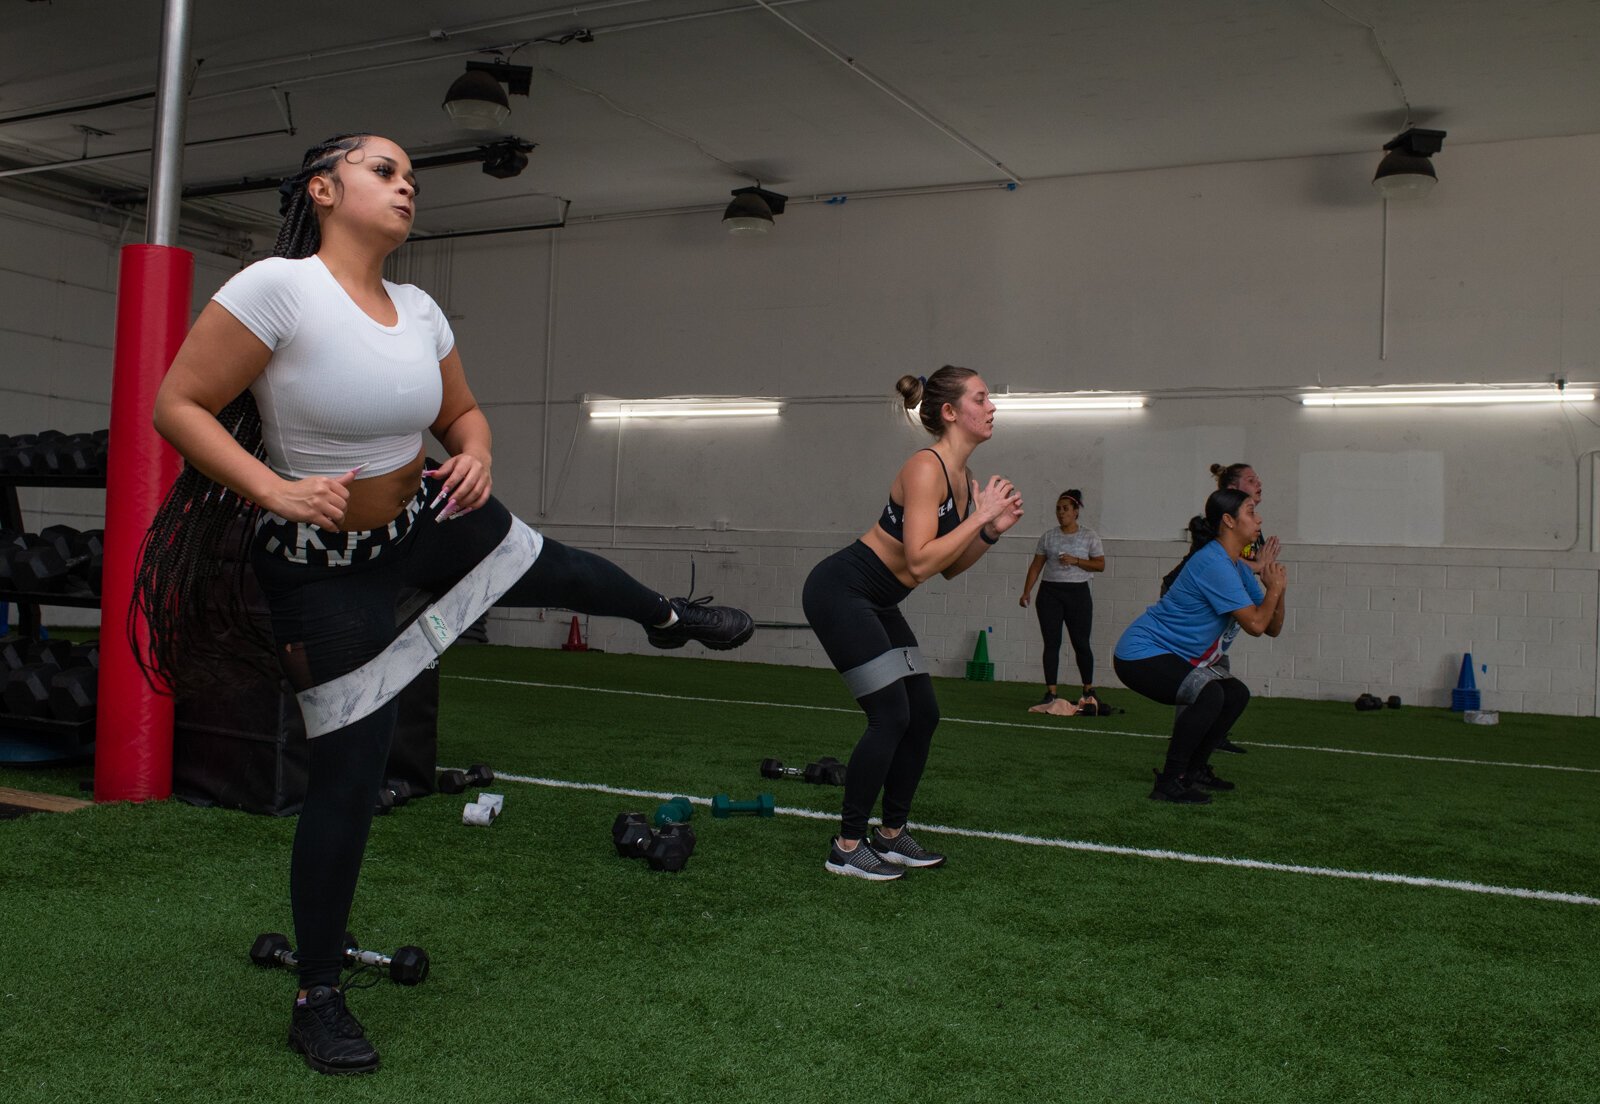 Arica Rencher, left, participates in one of Tori Leigh Fitness's small group workout classes.